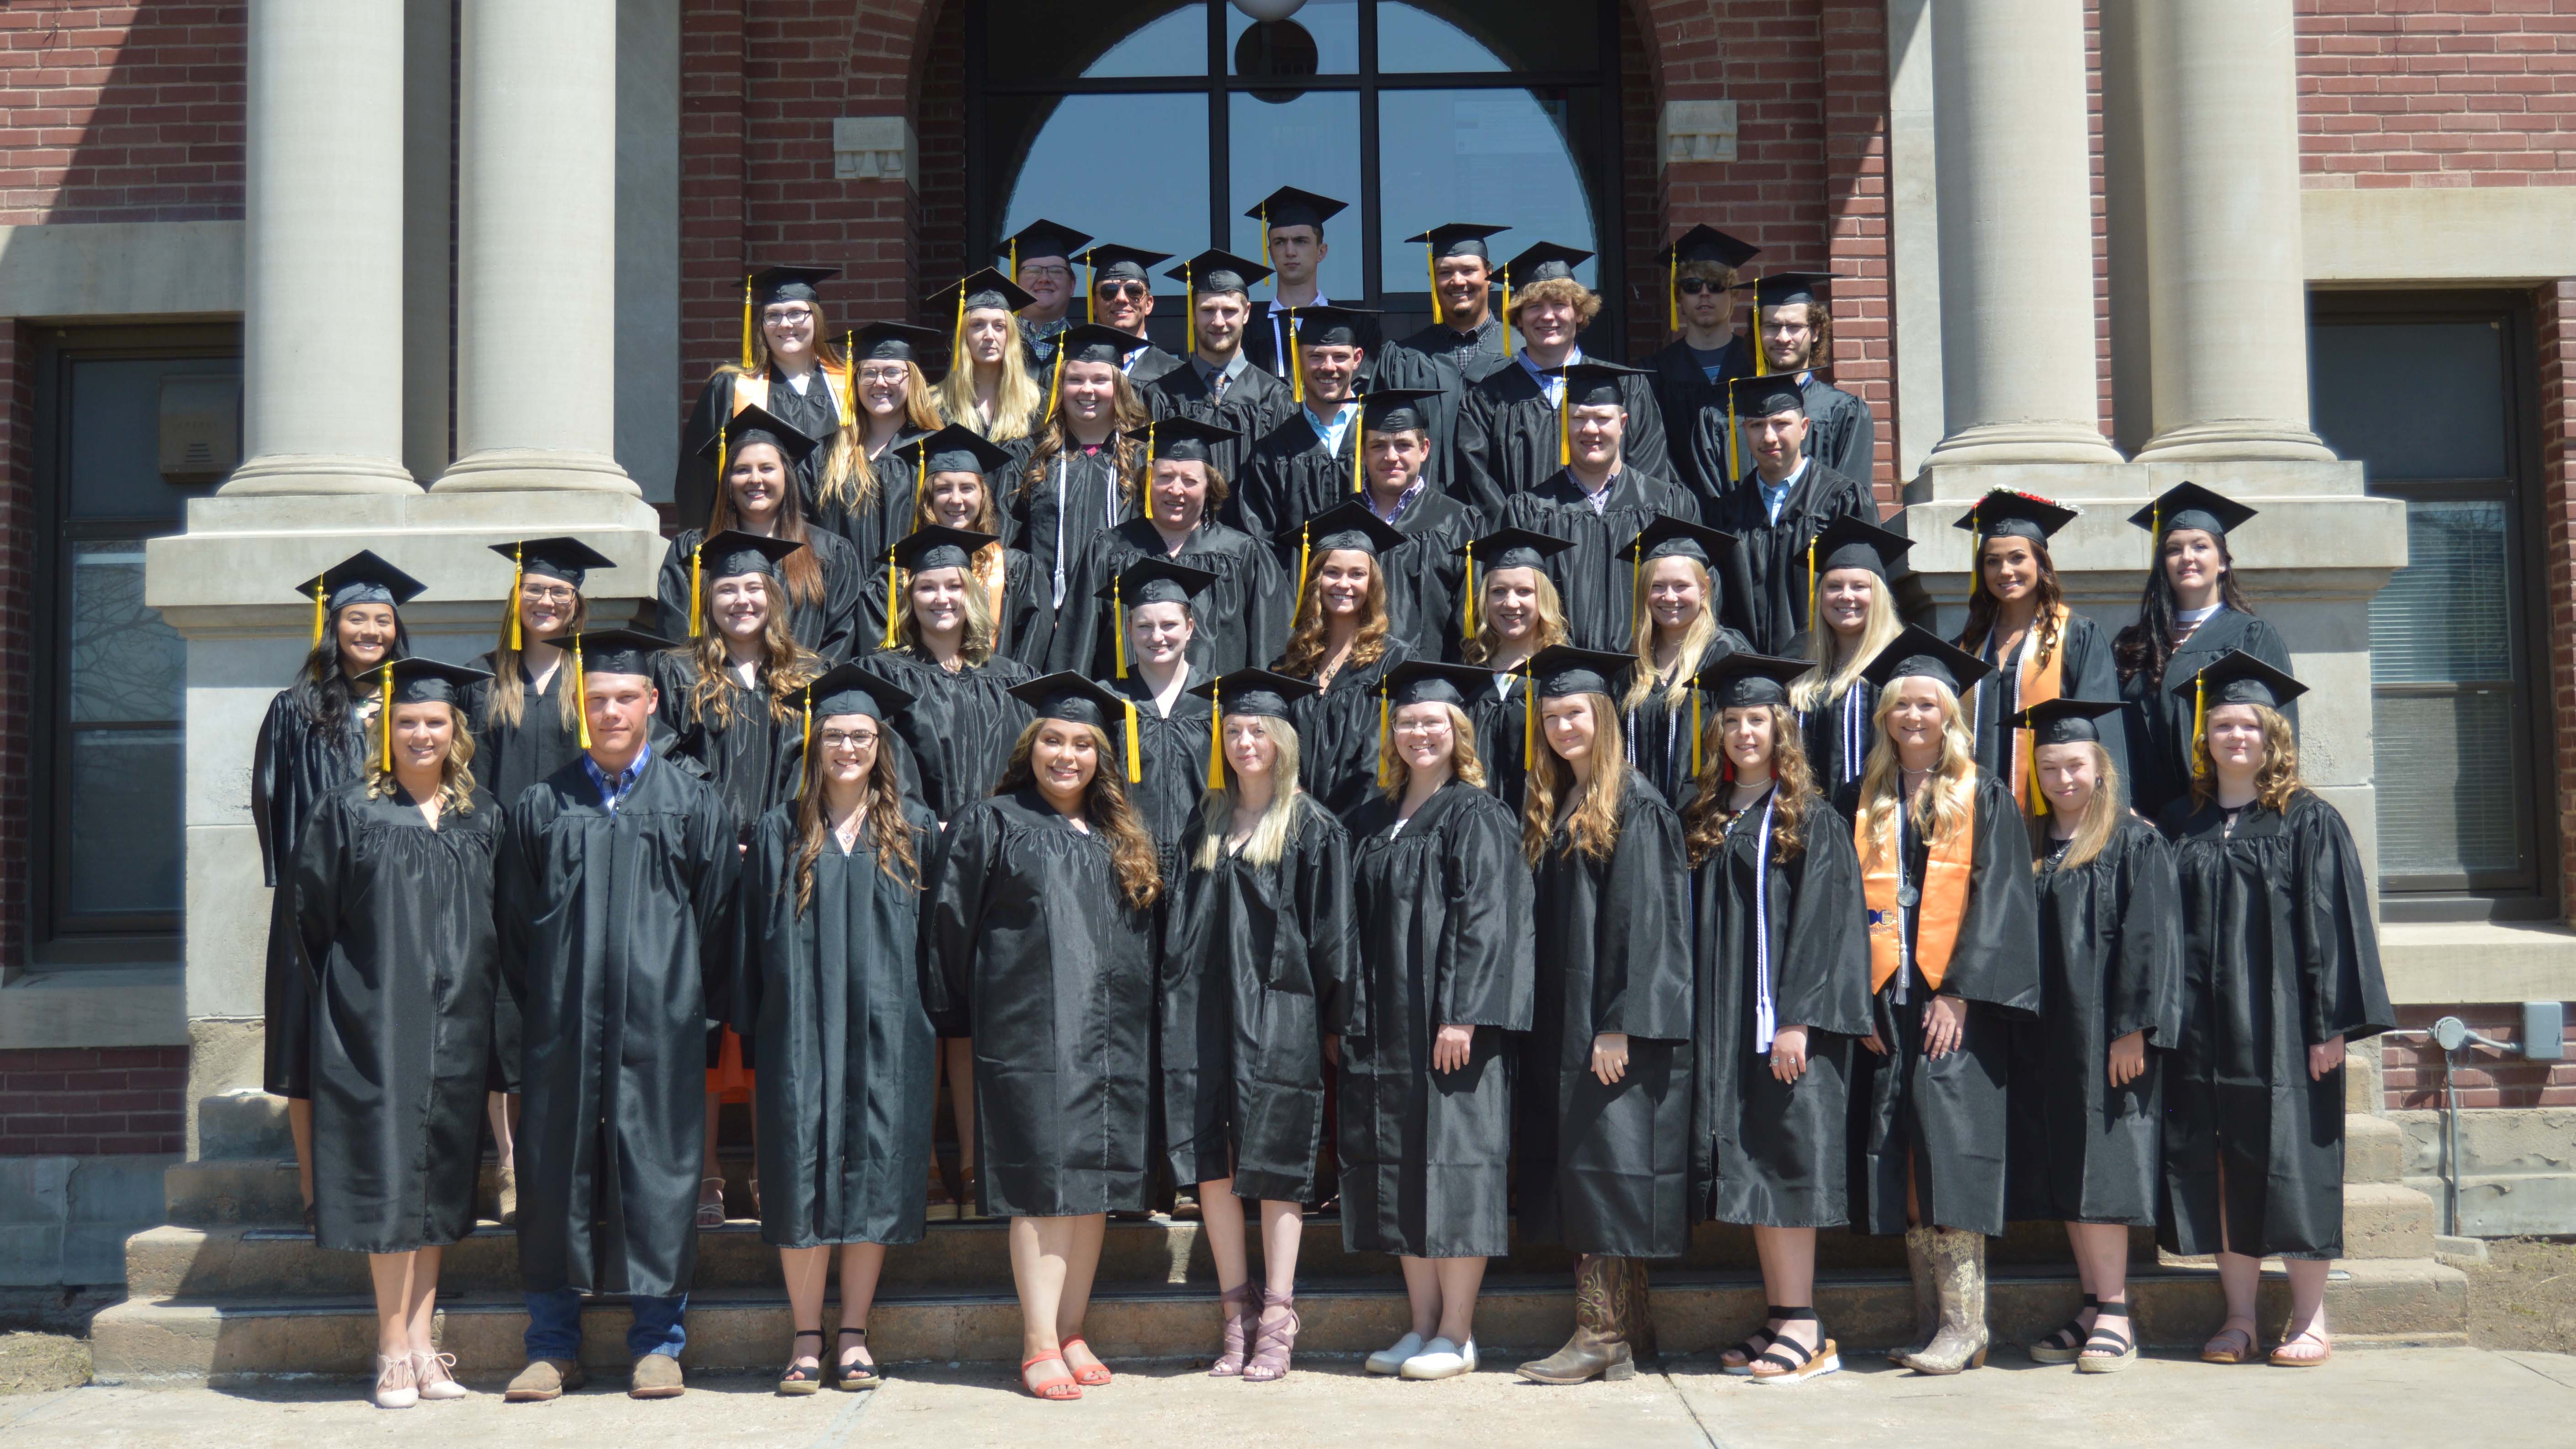 The Nebraska College of Technical Agriculture had graduation outdoors for the Class of 2021. The 2022 ceremony on Thursday will be at the Curtis Memorial Community Center. (NCTA Photo)